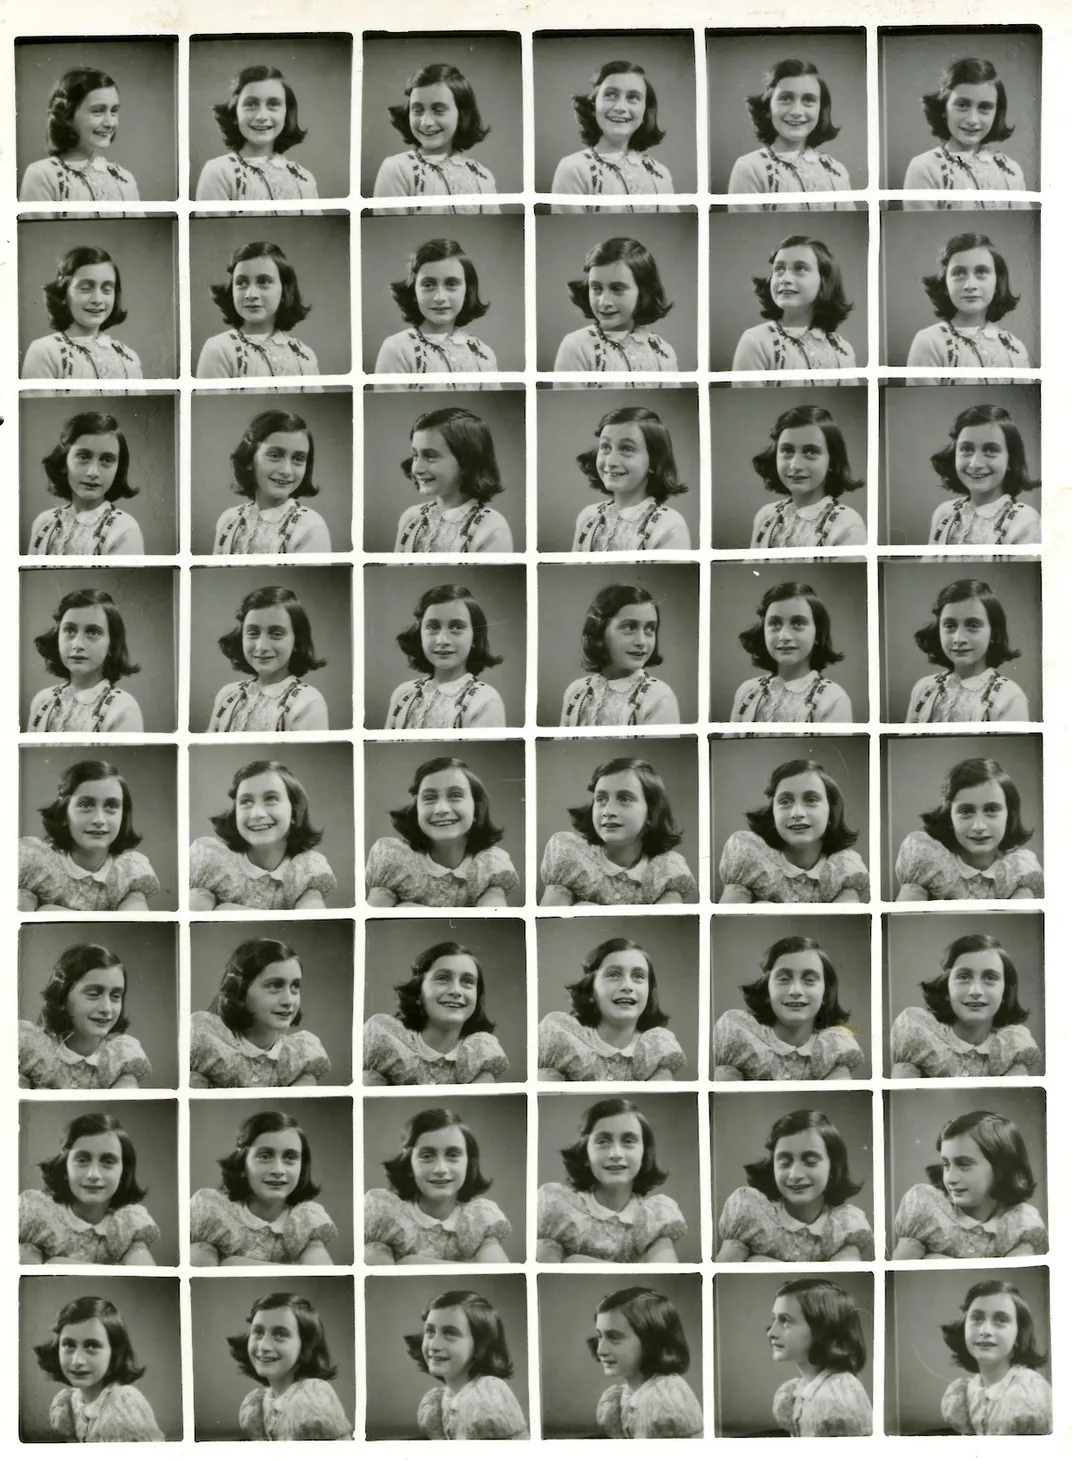 A 6 by 8 sheet of small photos taken in rapid succession of Frank, where she smiles, laughs and looks each way